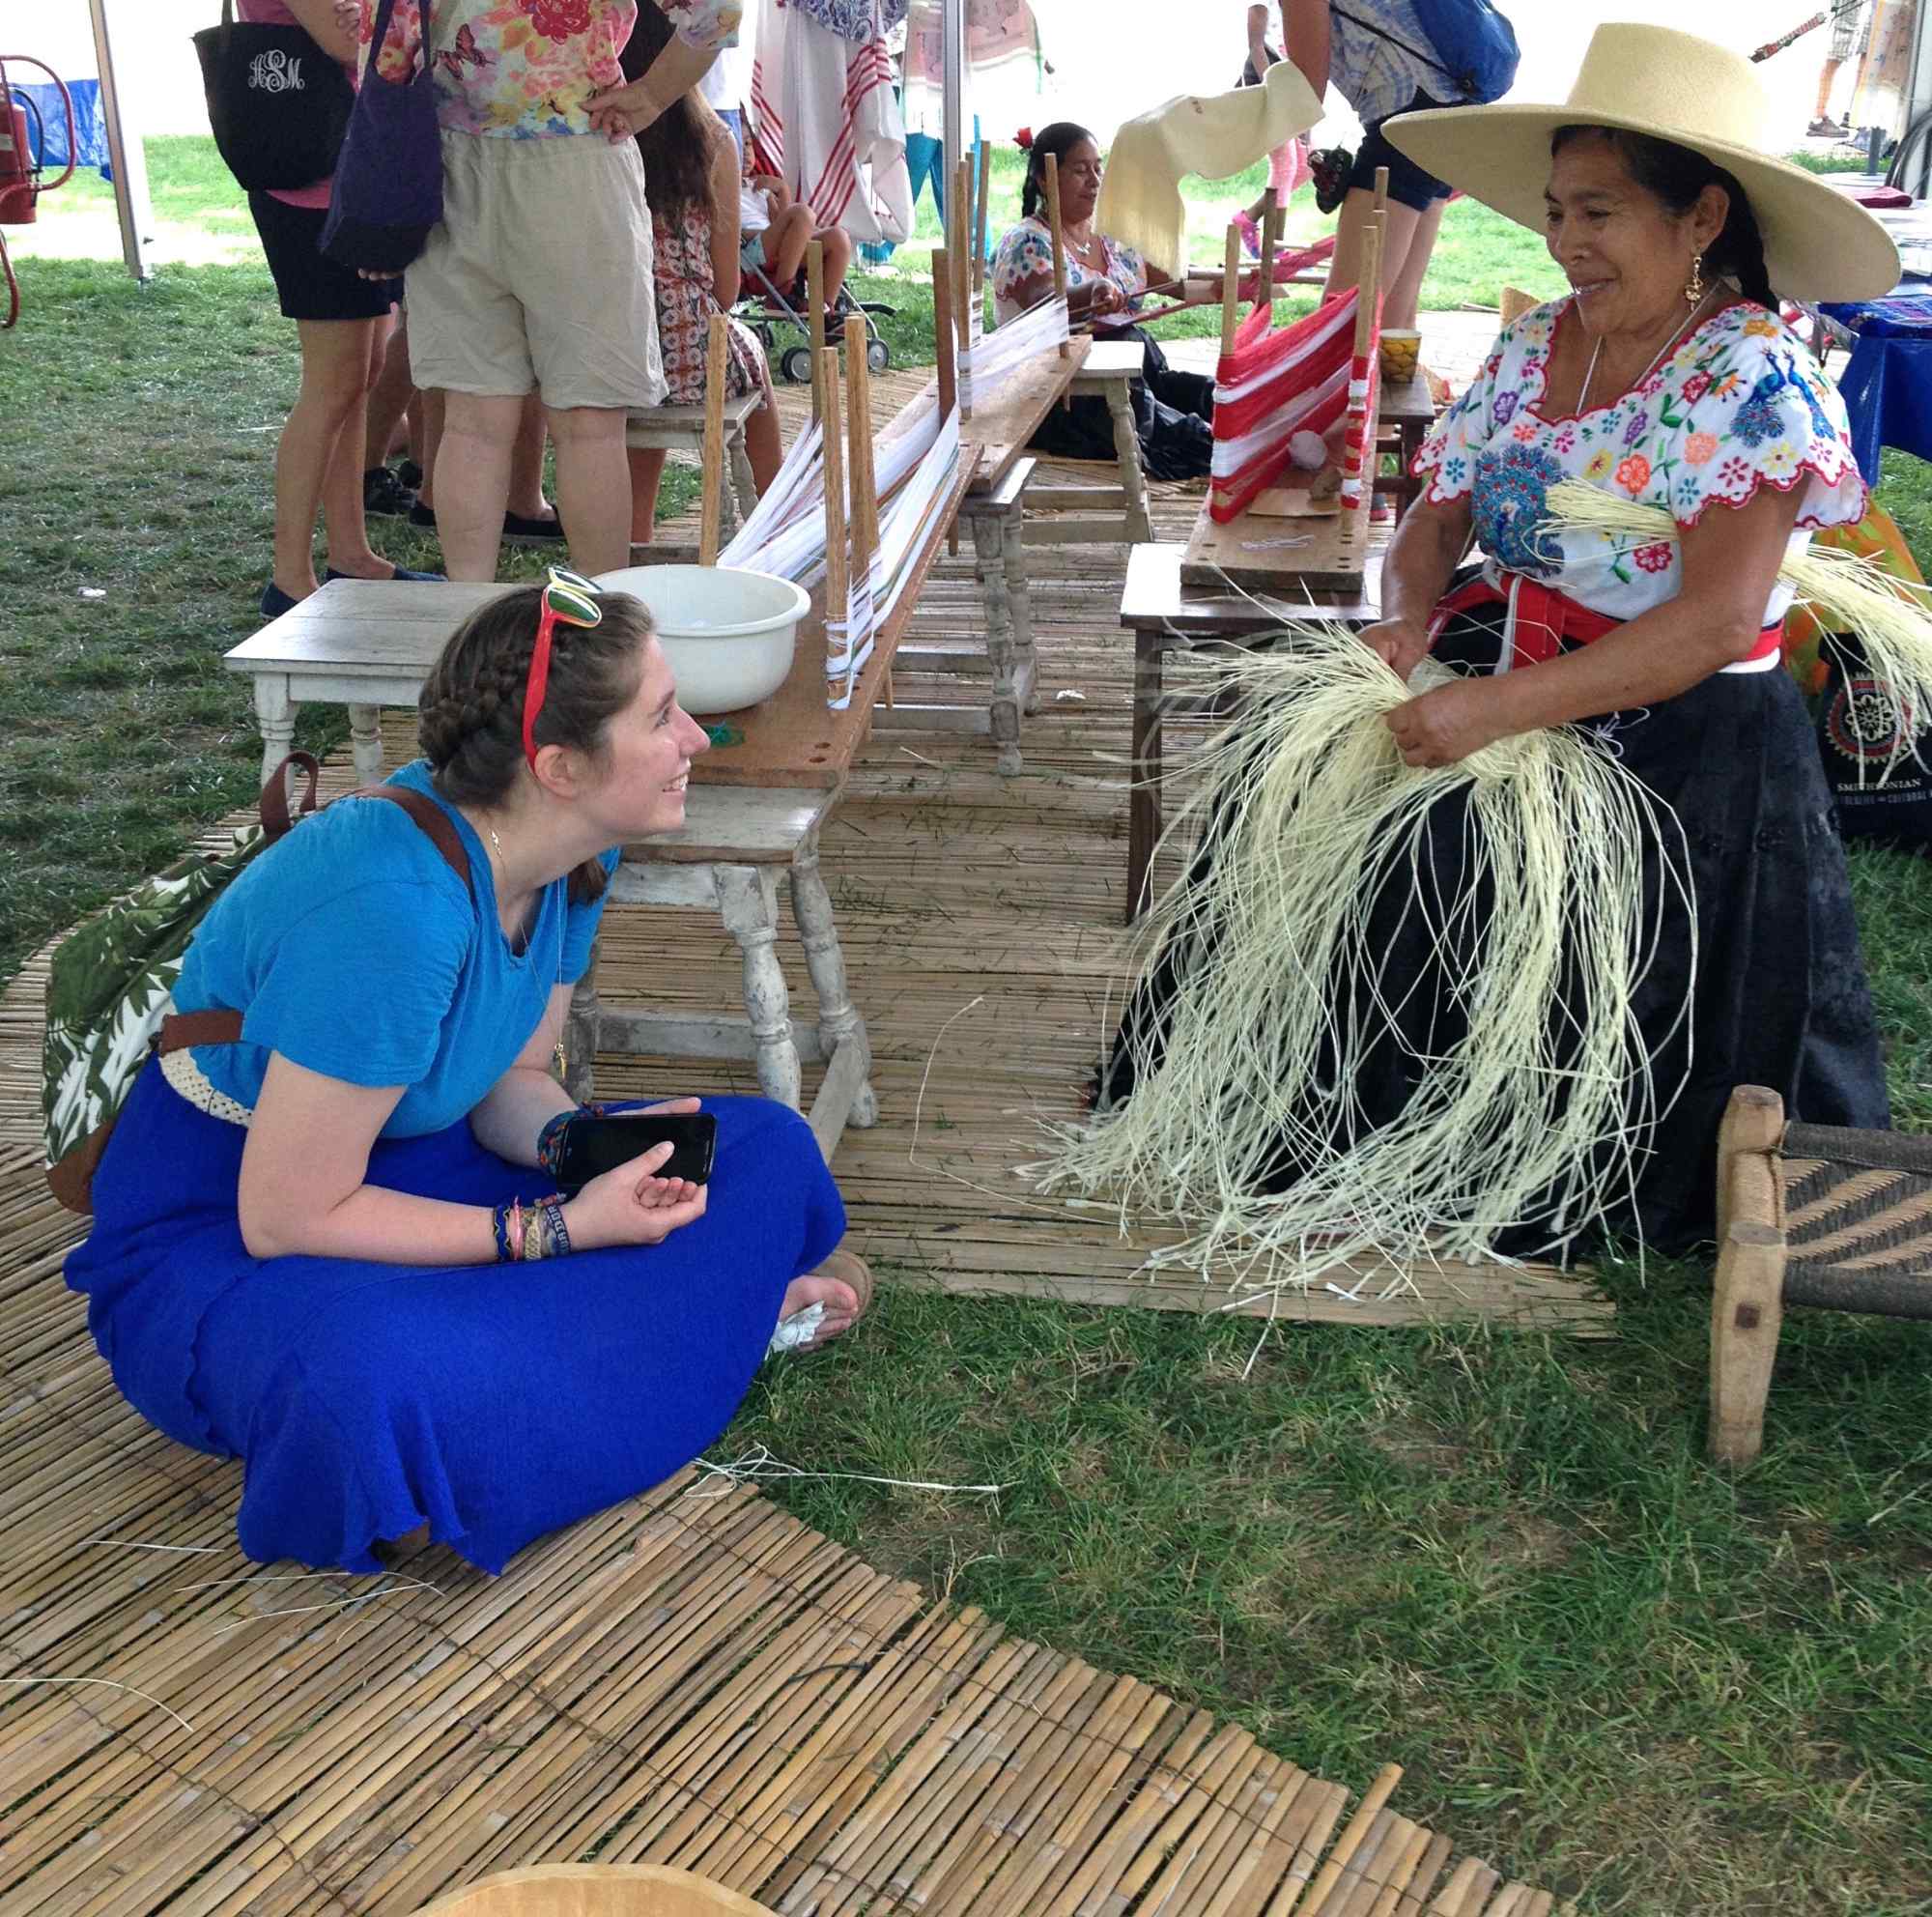 Rachel Brown ’16 meets a craftswoman at the 2015 Smithsonian Folklife Festival in Washington, D.C.